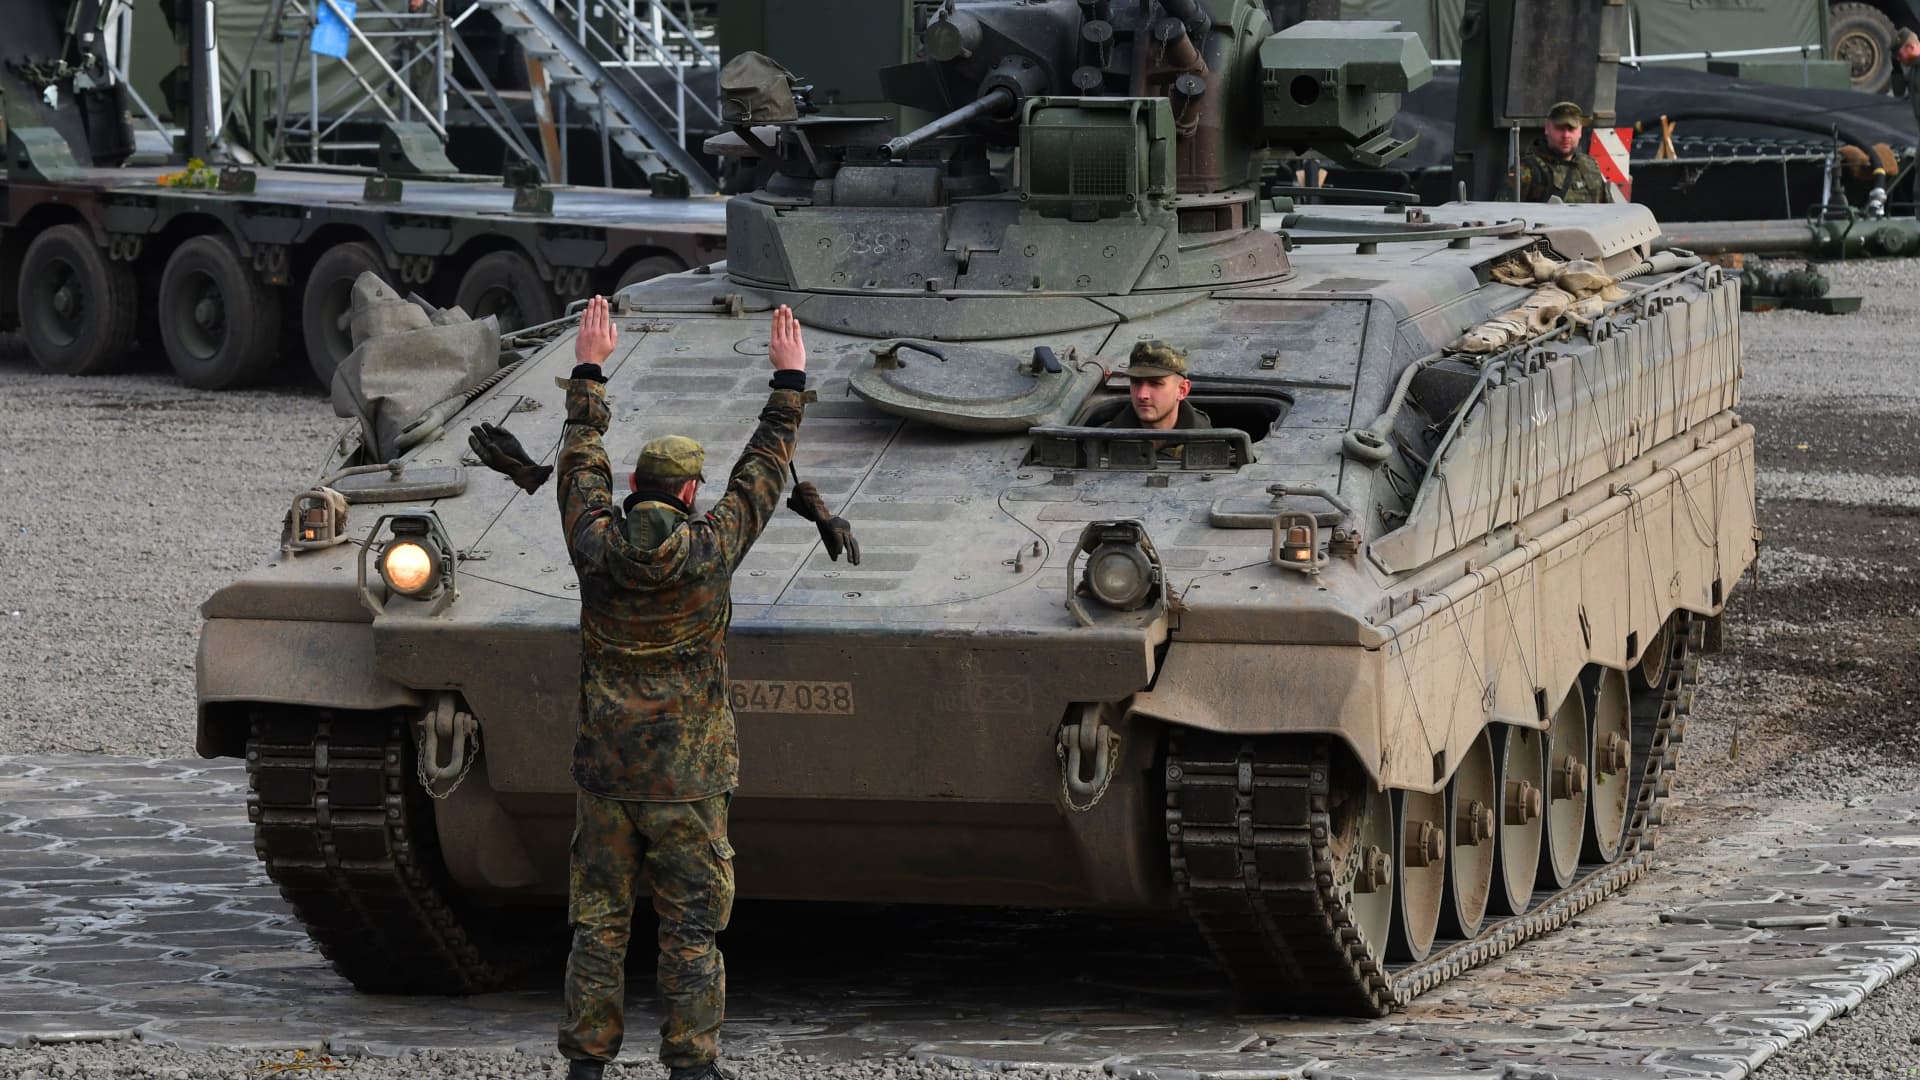 Germany promised Ukraine weapons but hasn’t delivered. Now, anger toward Berlin is rising